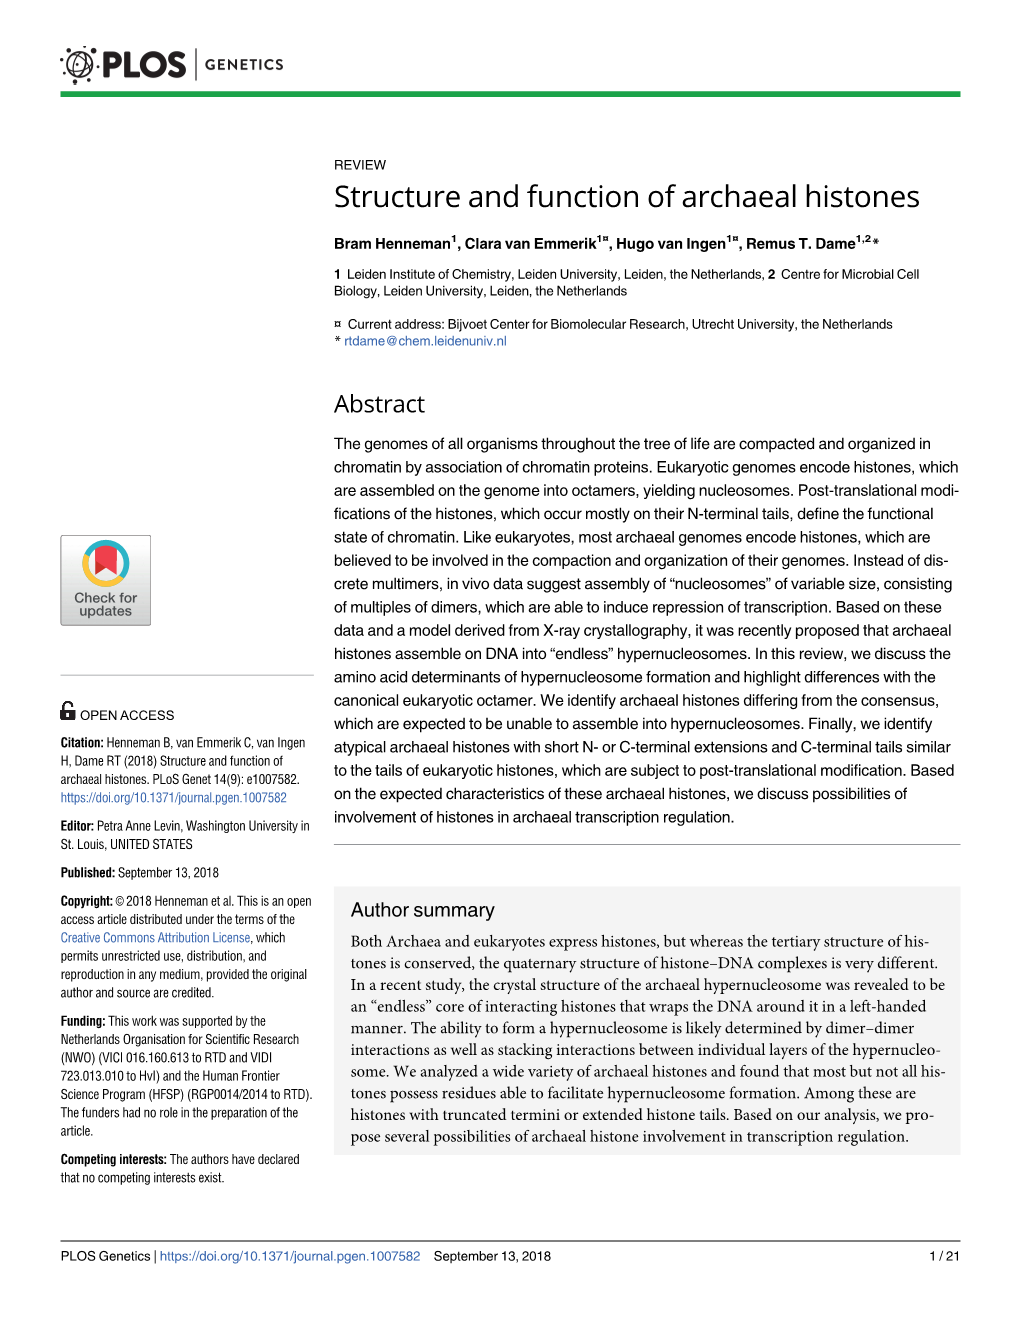 Structure and Function of Archaeal Histones